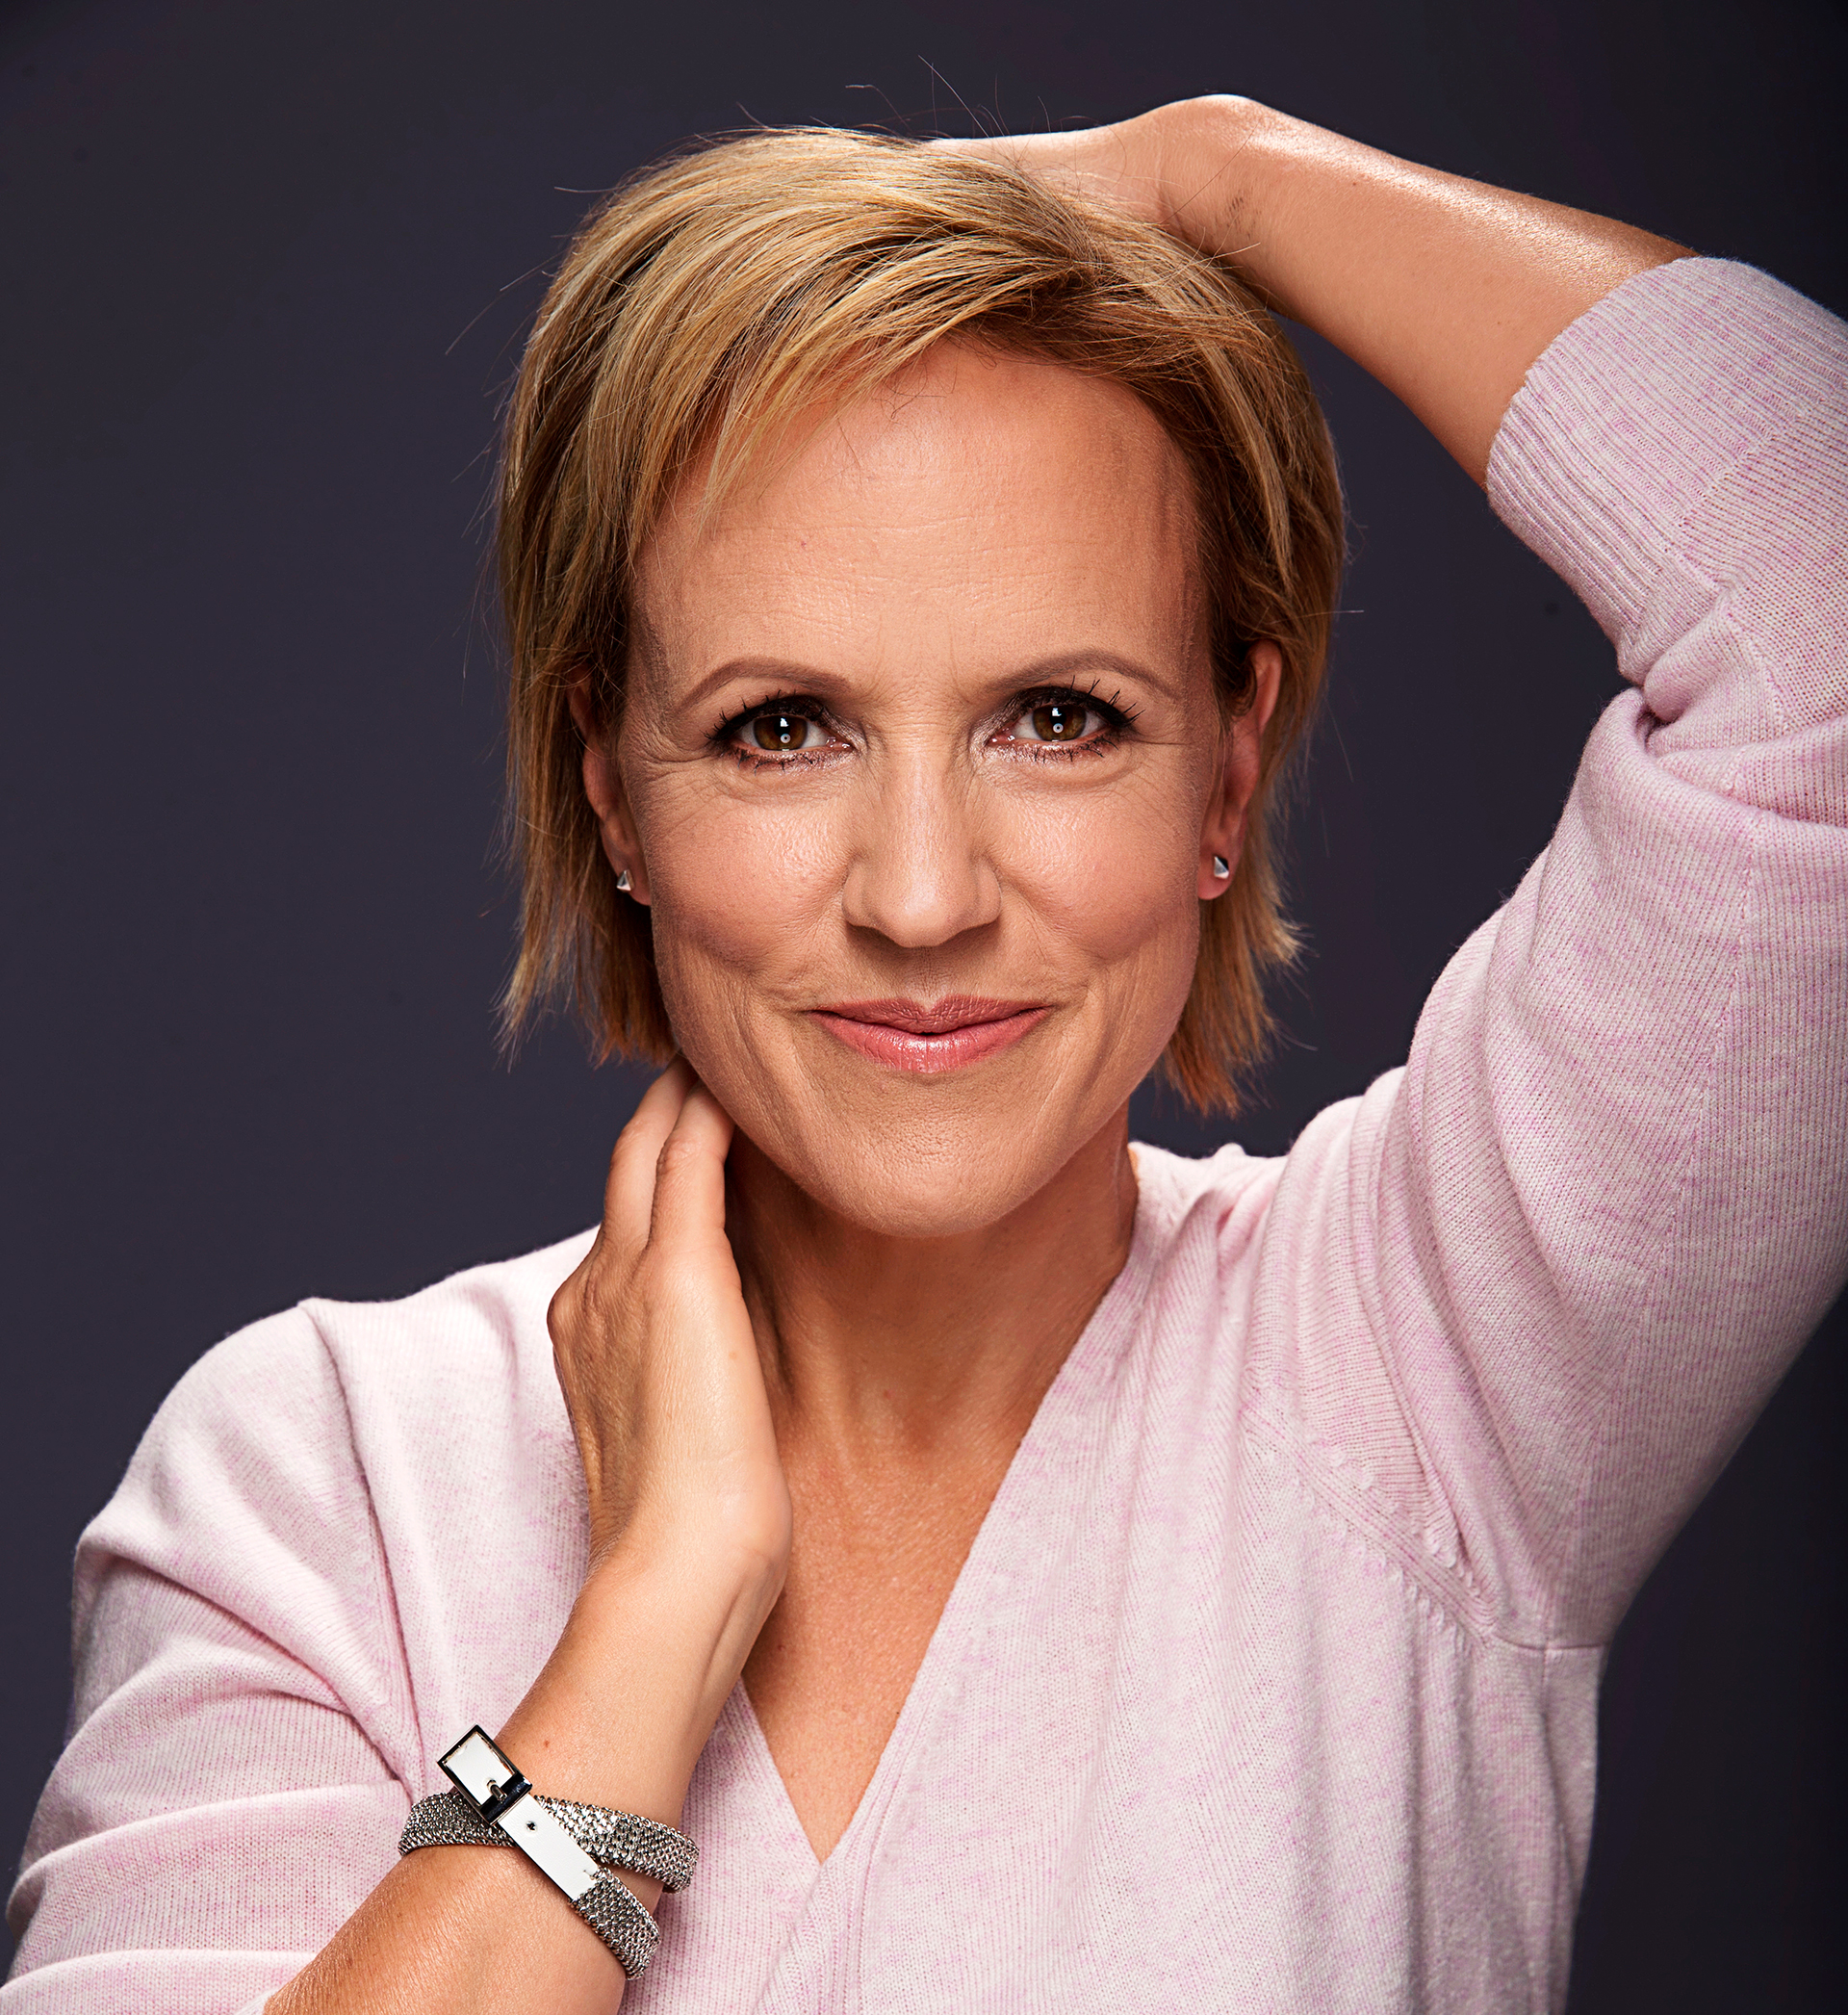 Hilary Barry: ‘They didn’t hire me for my looks’